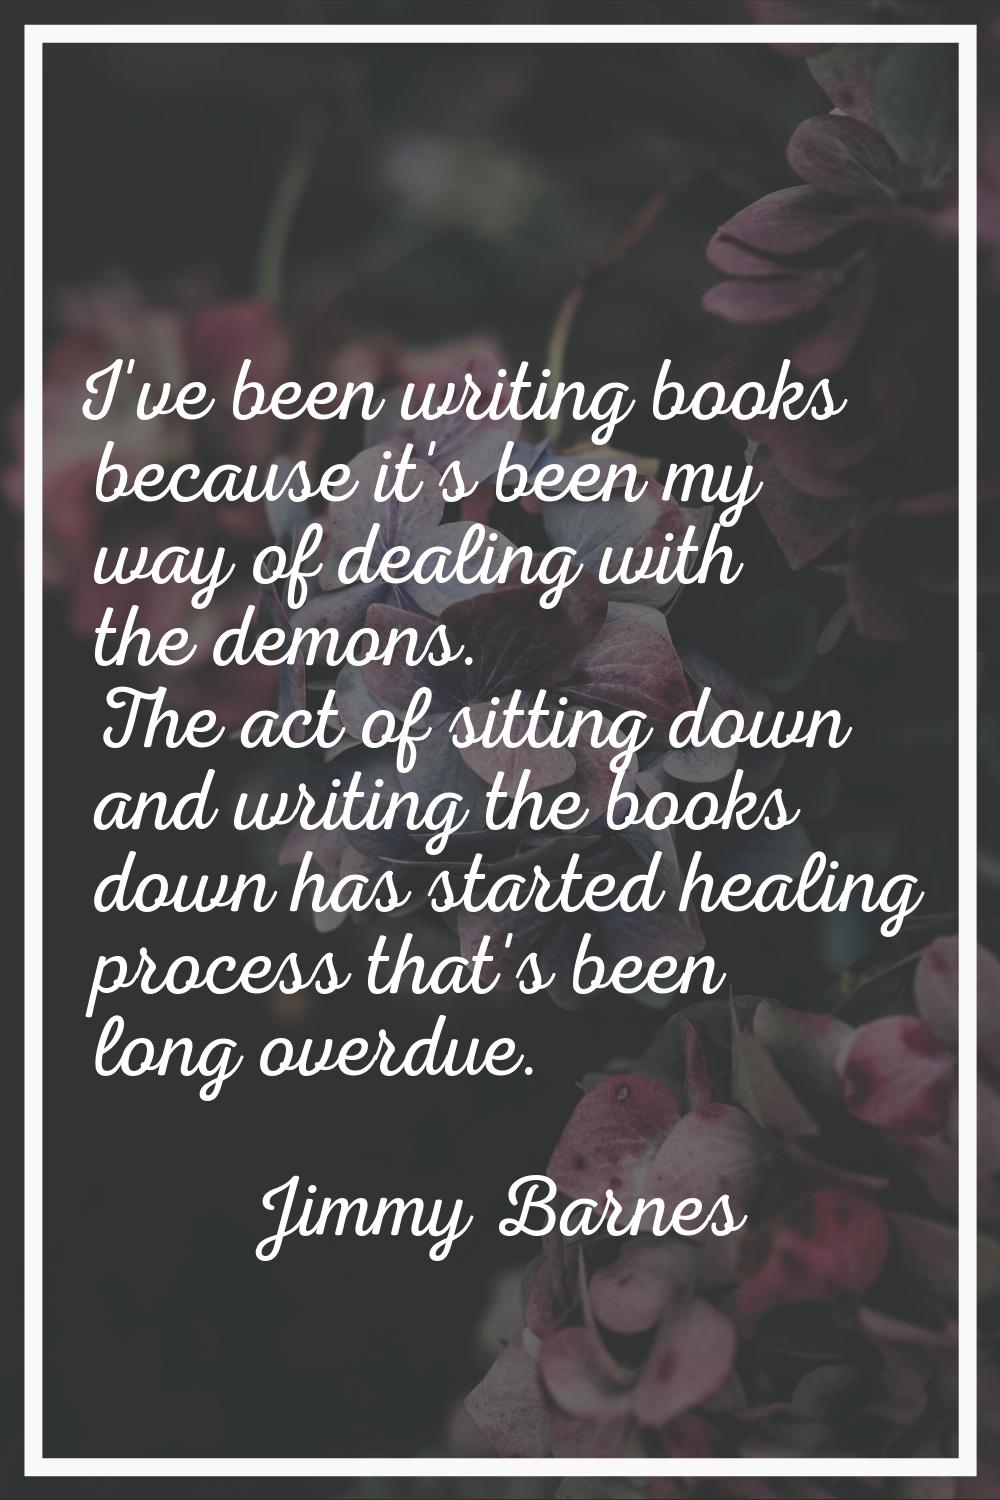 I've been writing books because it's been my way of dealing with the demons. The act of sitting dow